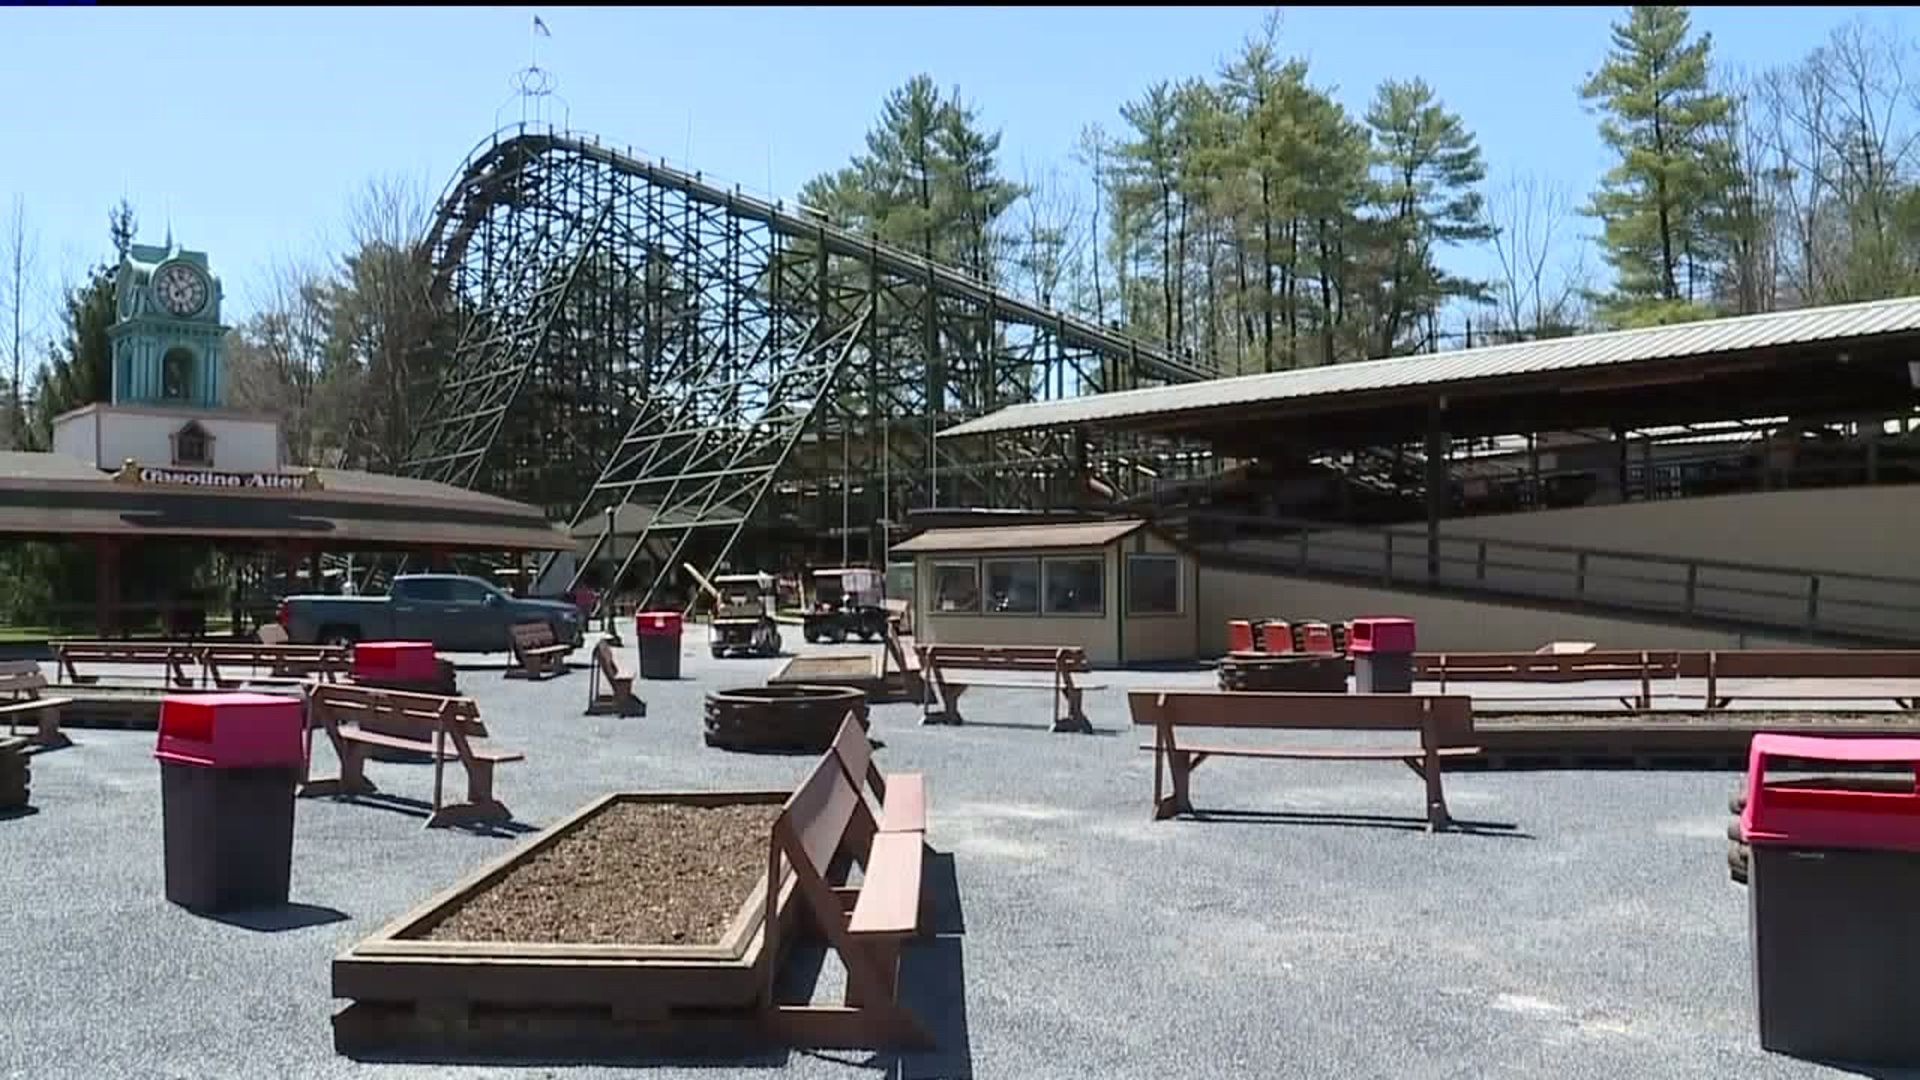 What`s New at Knoebels?